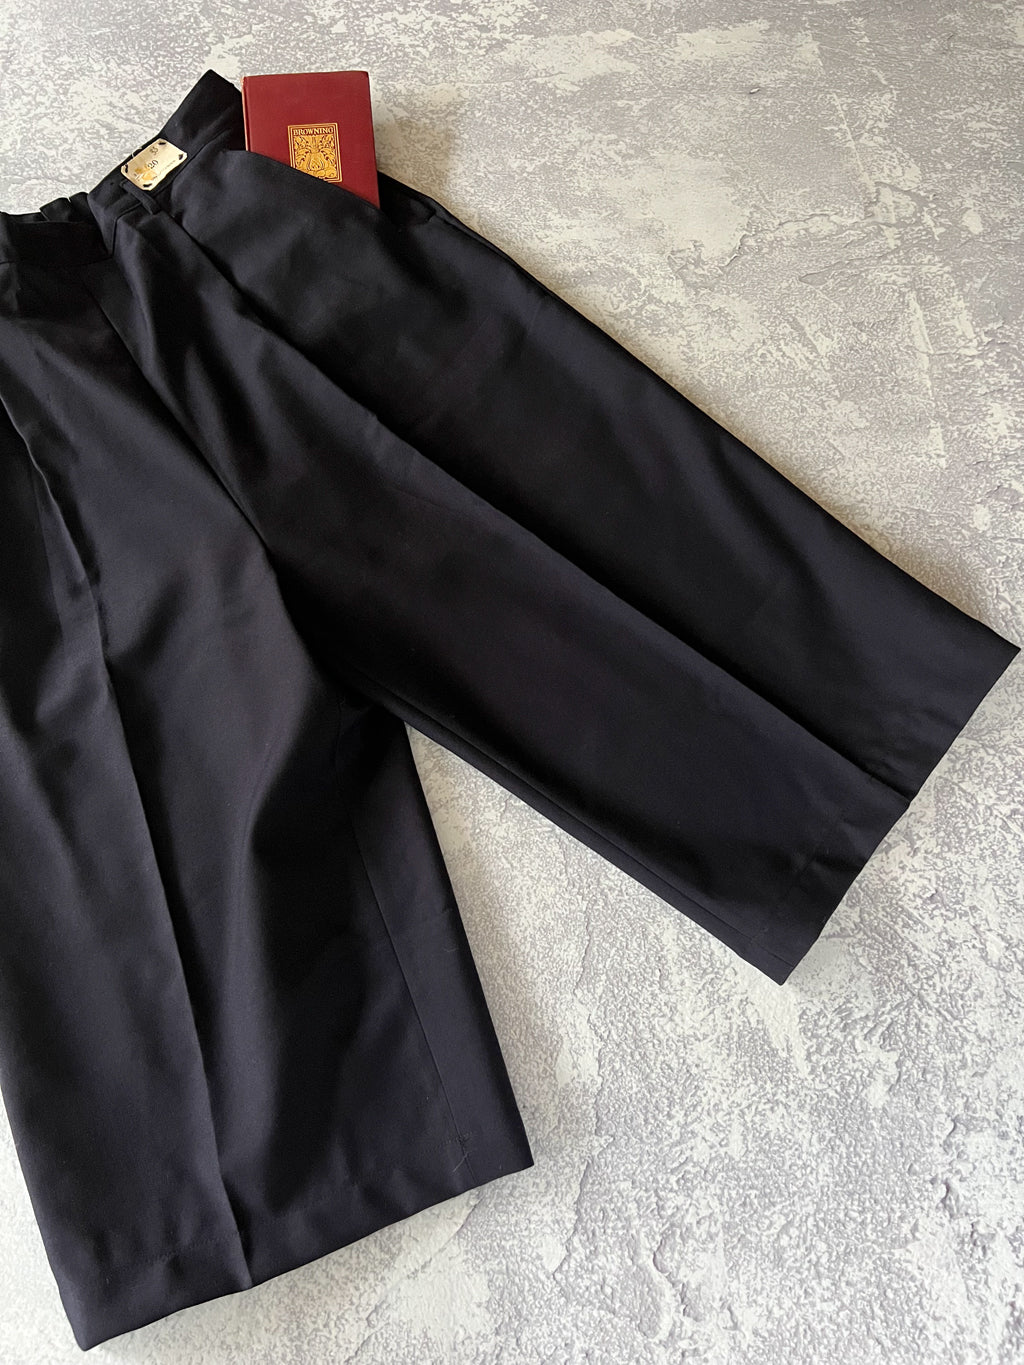 Vintage 1940s RARE Deadstock Wide Leg Culottes Pants - Navy Twill Sport Cropped Trousers Size L to XL